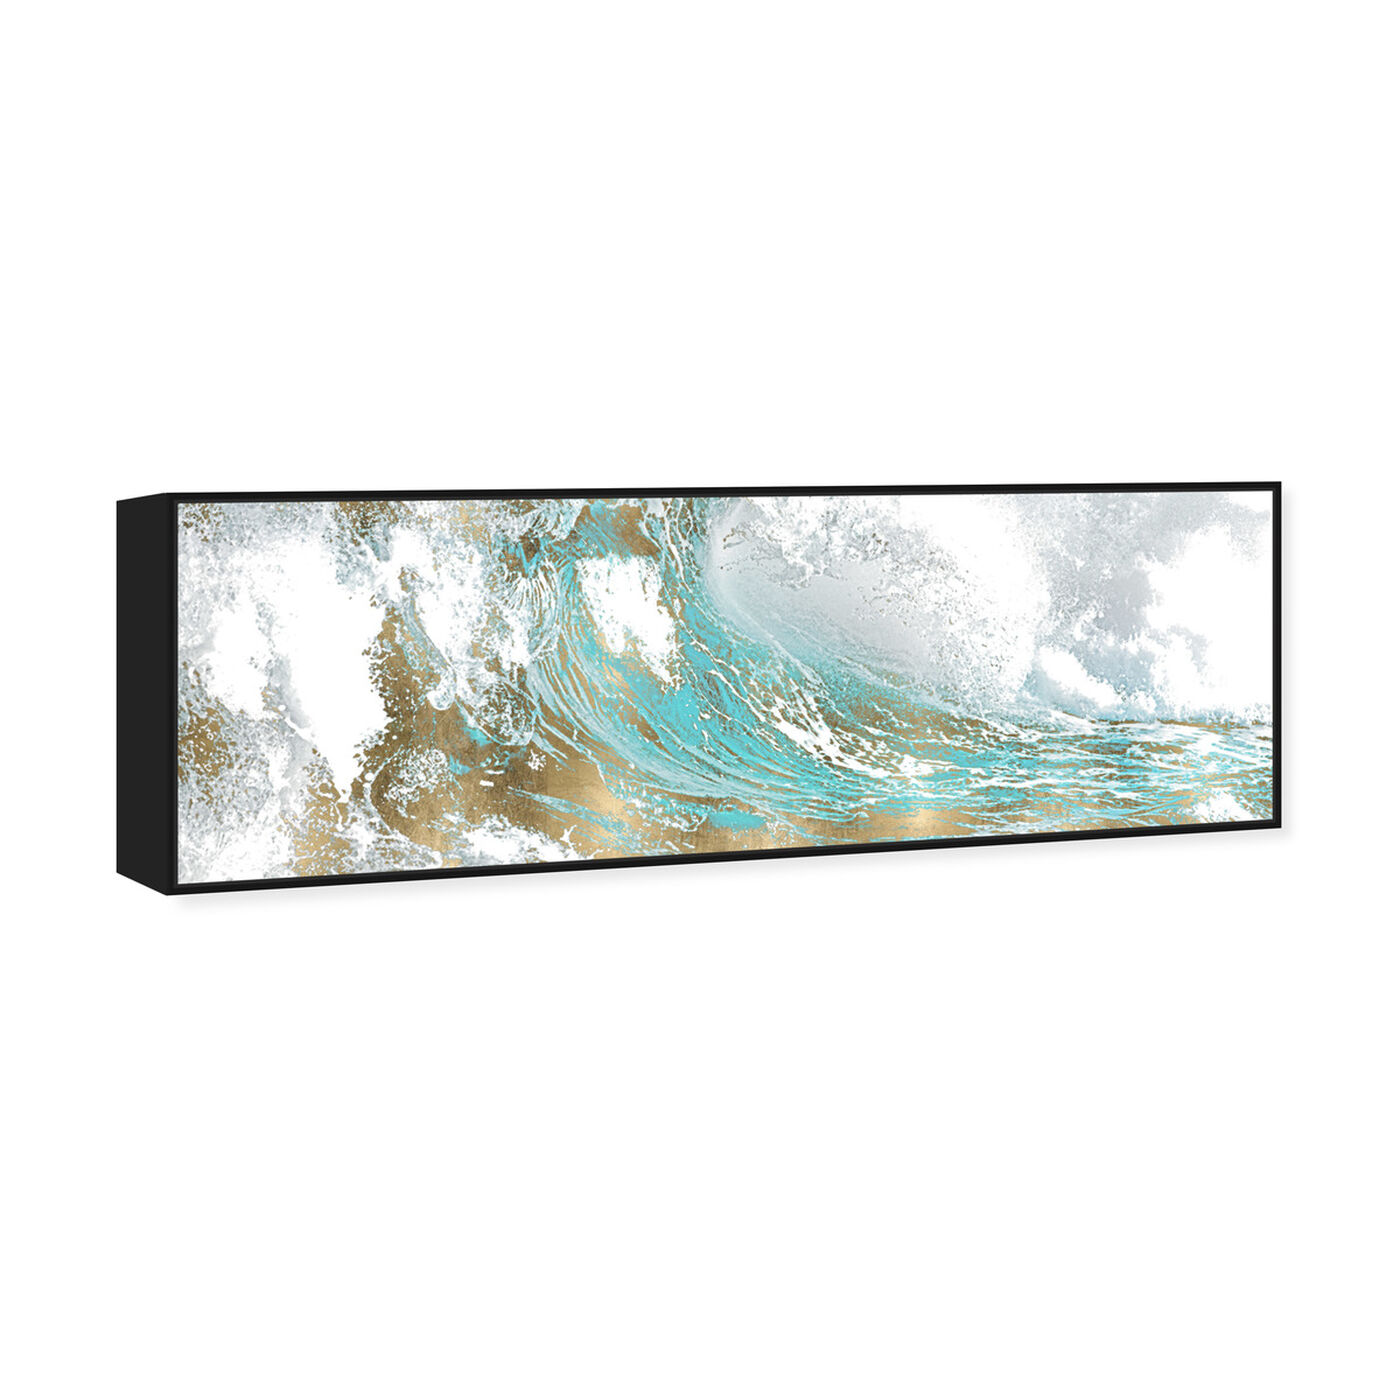 Angled view of Wave in a Moment Aqua featuring abstract and paint art.